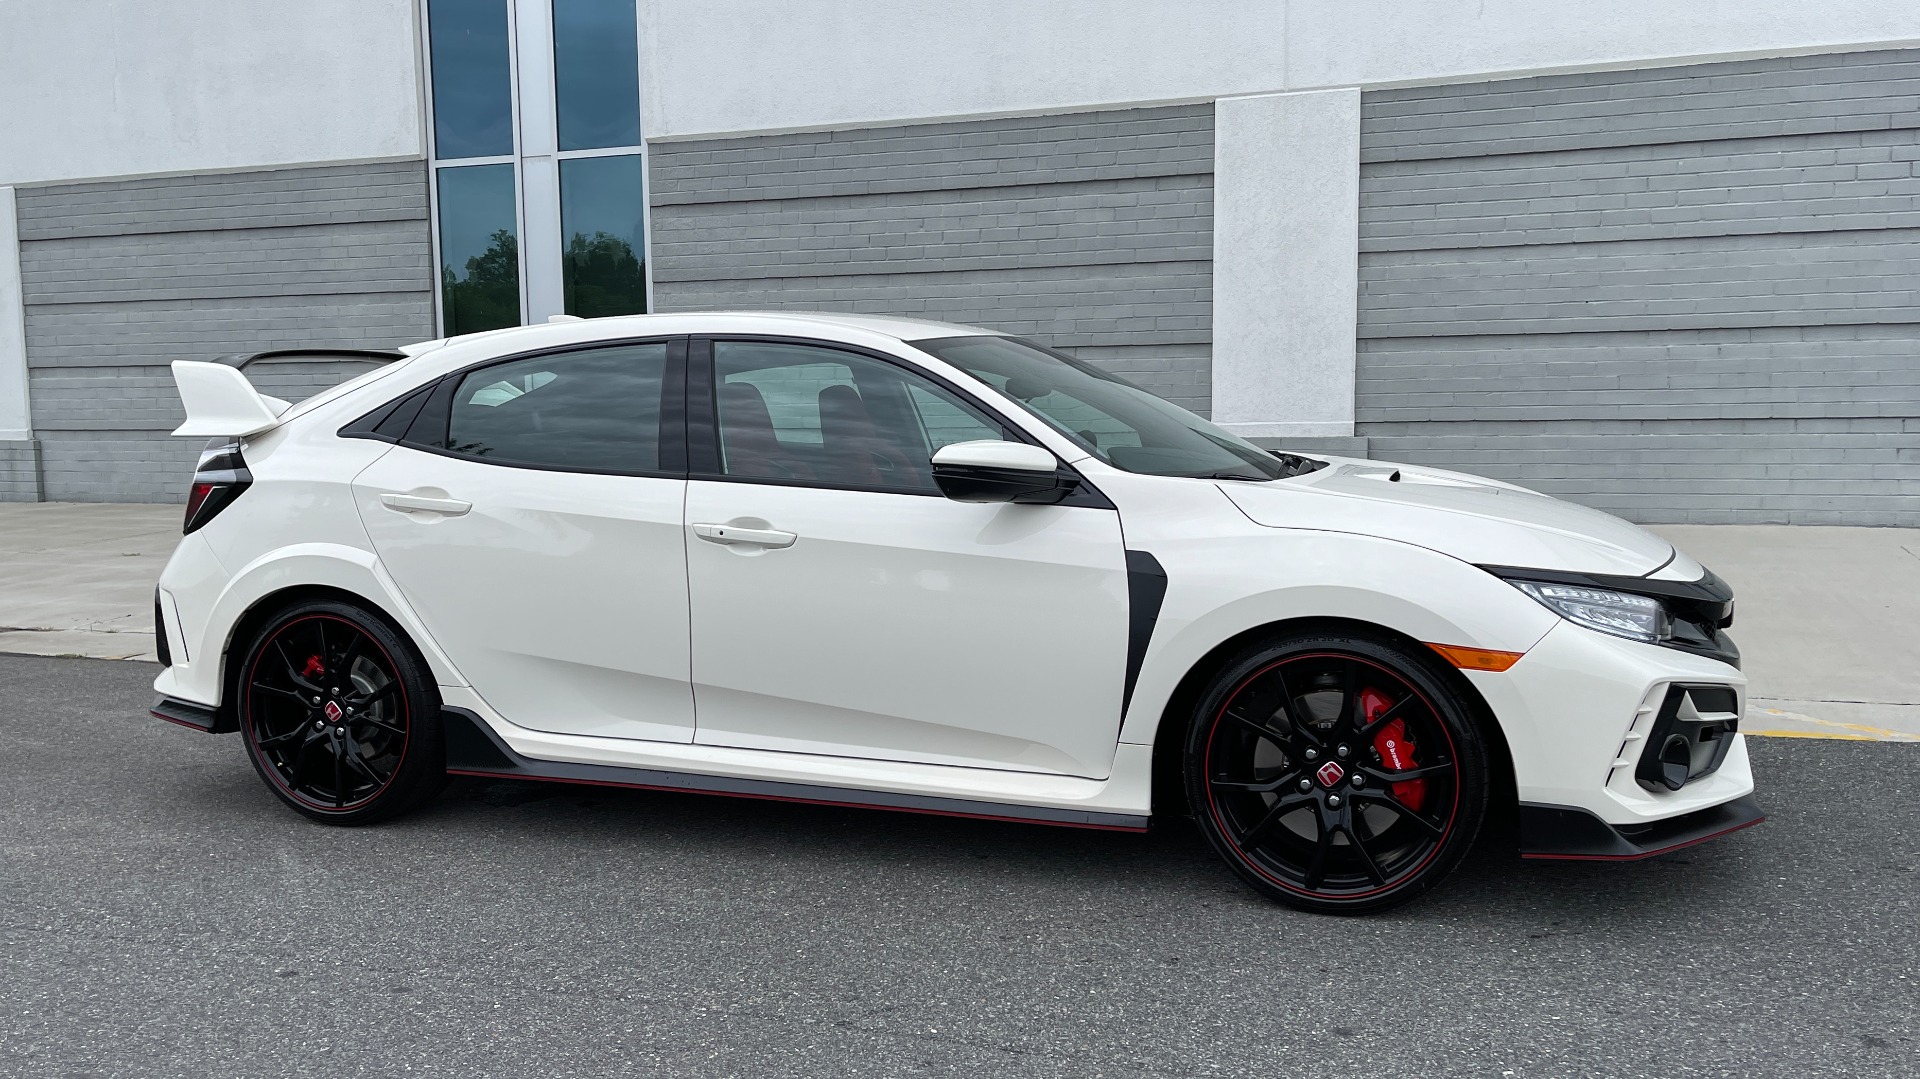 2021 Honda Civic Type R Limited Edition First Drive: Weight Watcher